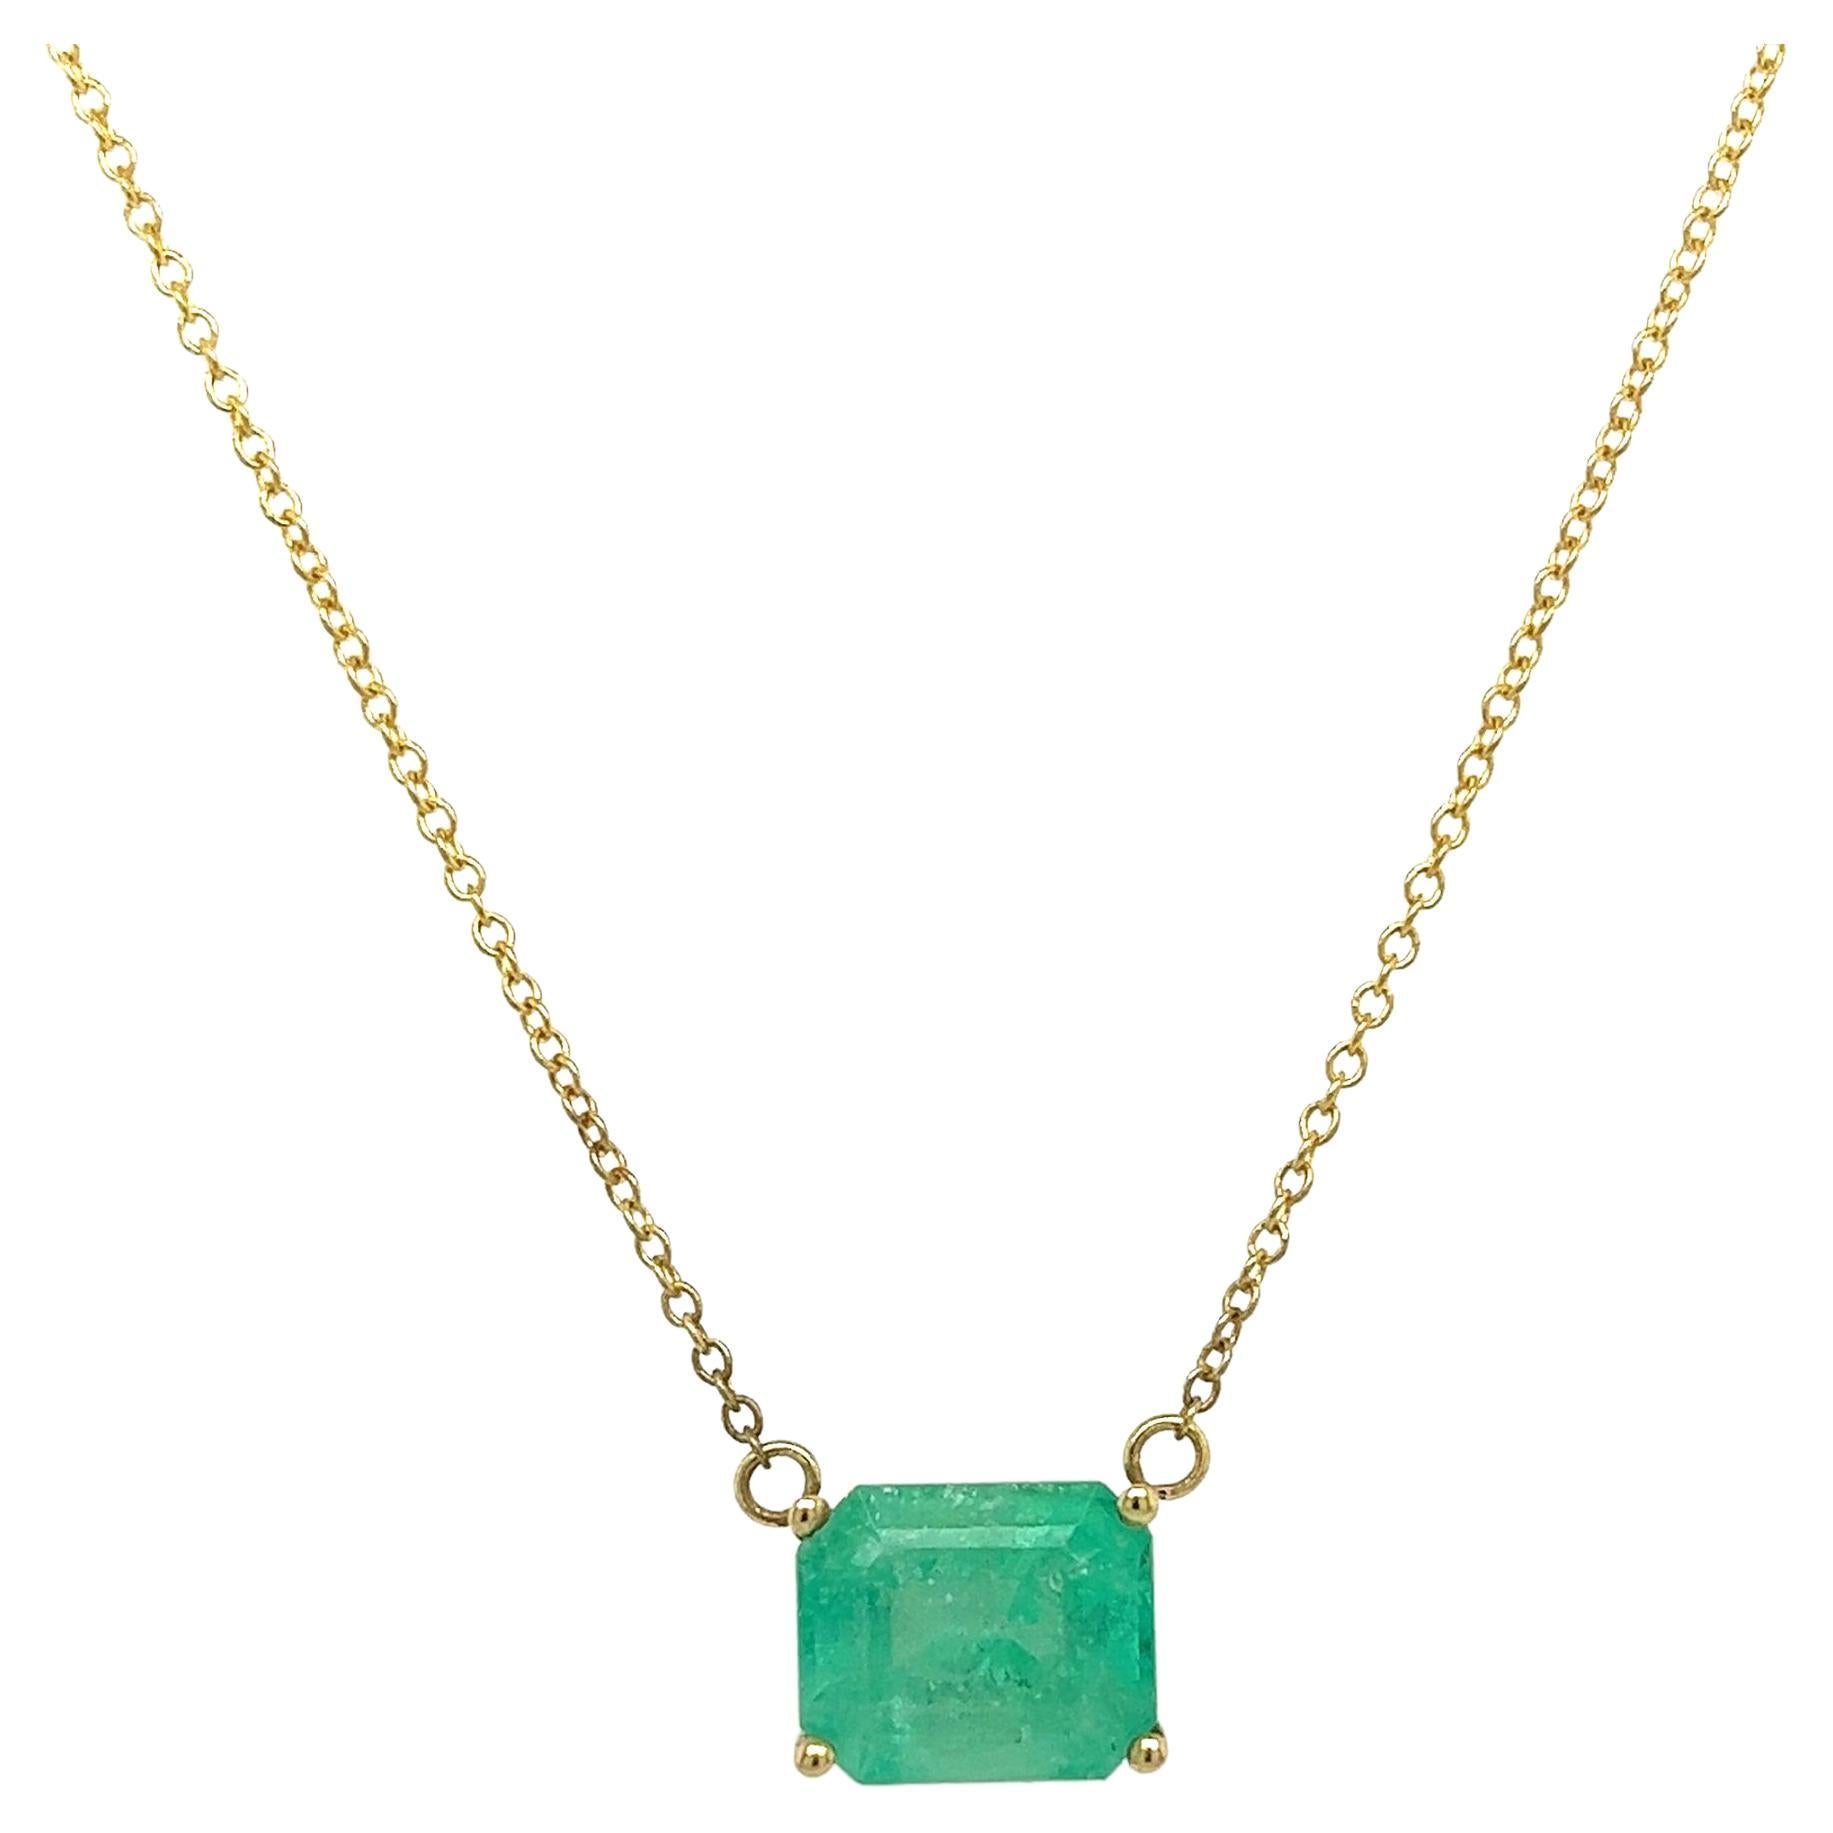 3.6 Carat Colombian Emerald Solitaire East West Pendant Necklace in 14K Gold